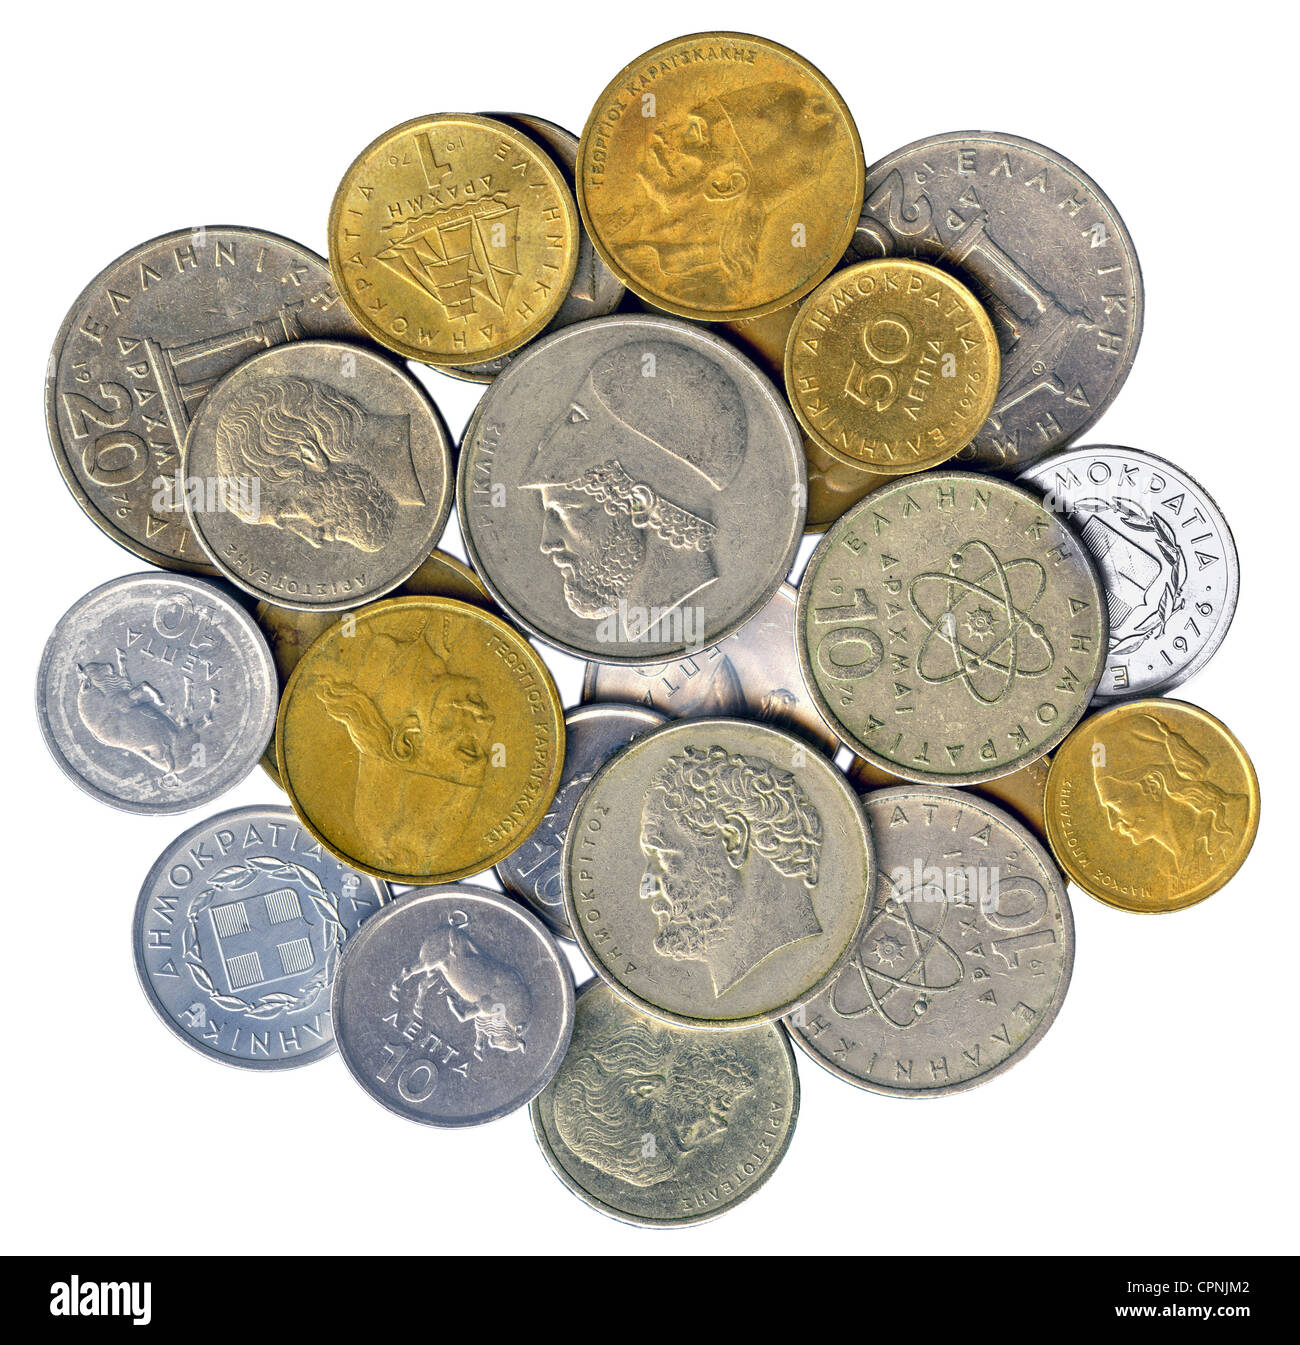 money / finances,coins,Greek coins,from 20 Lepta,(right)up to 10 and 20 drachma,gold coin,(left),one drachma is equal to 100 Lepta,illustrated: King George I,(Greek King 1863 - 1913),contemporary embossing on paper,Greece,1874,1875,currency,currencies,valuta,means of payment,economy,monarchy,monarchies,kingdom,realm,kingdoms,clipping,cut out,cut-out,cut-outs,19th century,finances,hard cash,coined money,small change,silver,gold,silver coins,Lepton,Greek,Grecian,gold coin,gold coins,drachma,drachm,dram,historic,histor,Additional-Rights-Clearences-Not Available Stock Photo